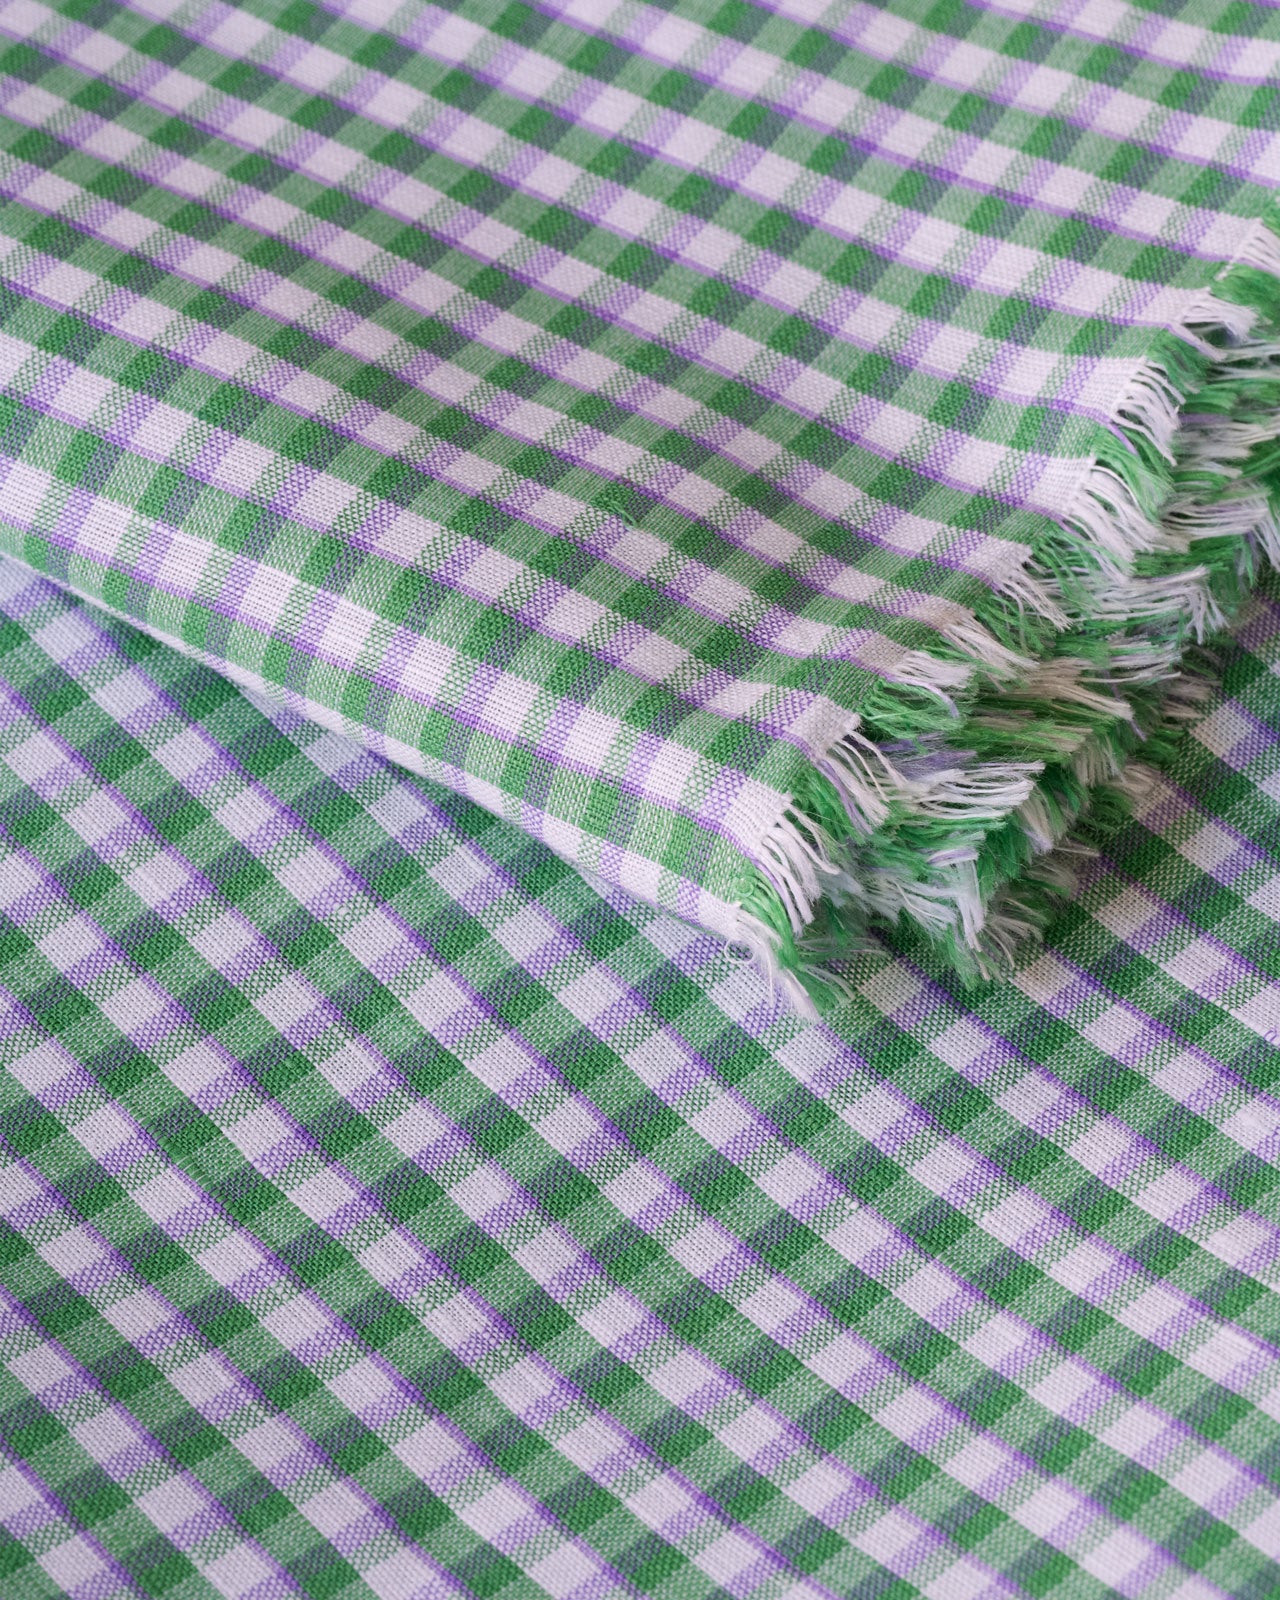 Close up image of green gingham deadstock linen cotton fabric for sewing home made clothes